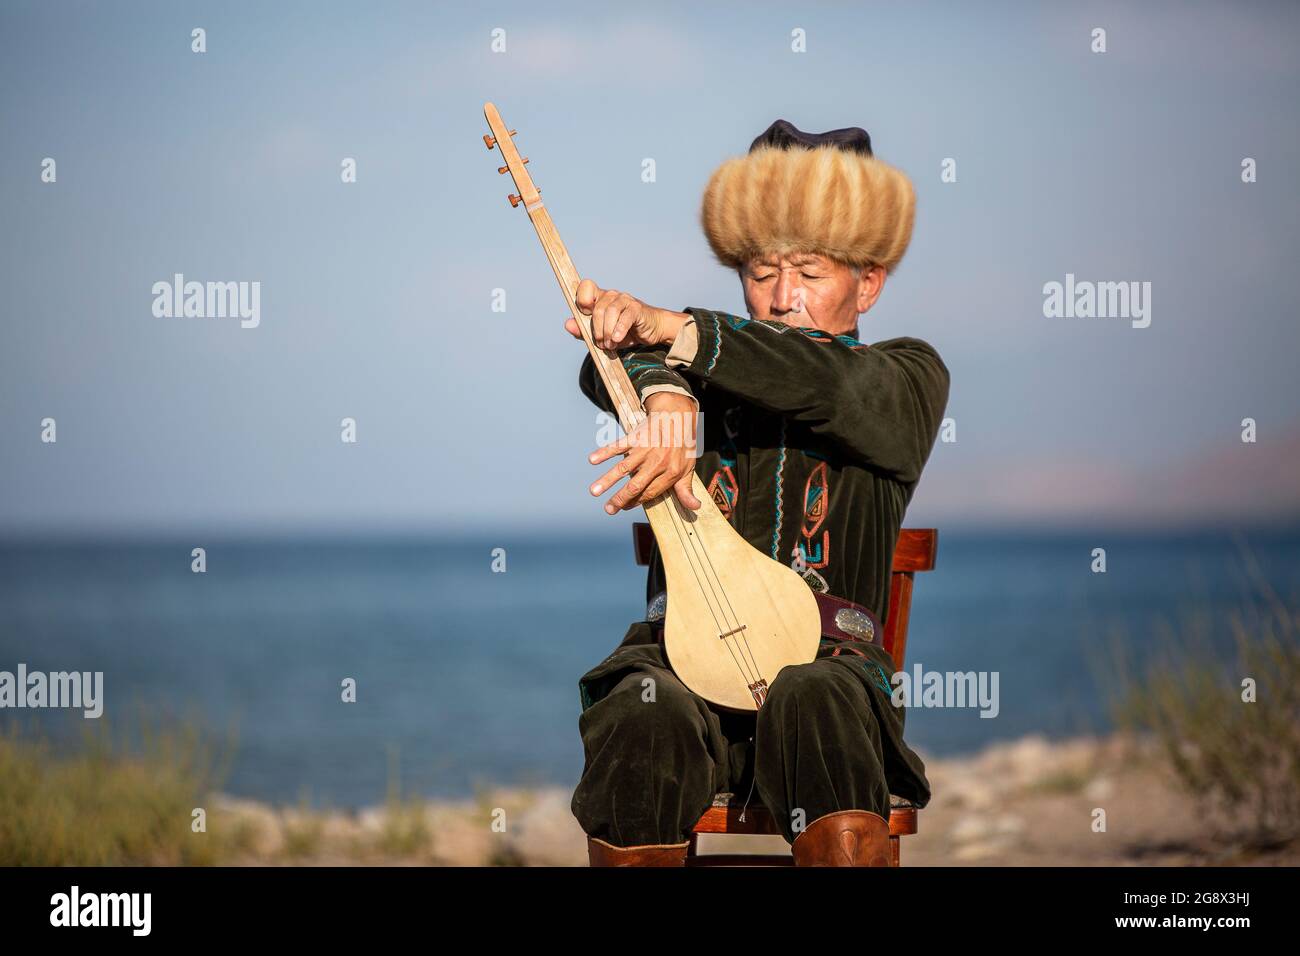 Kyrgyz musician playing traditional musical instrument known as Komuz in Issyk Kul, Kyrgyzstan Stock Photo